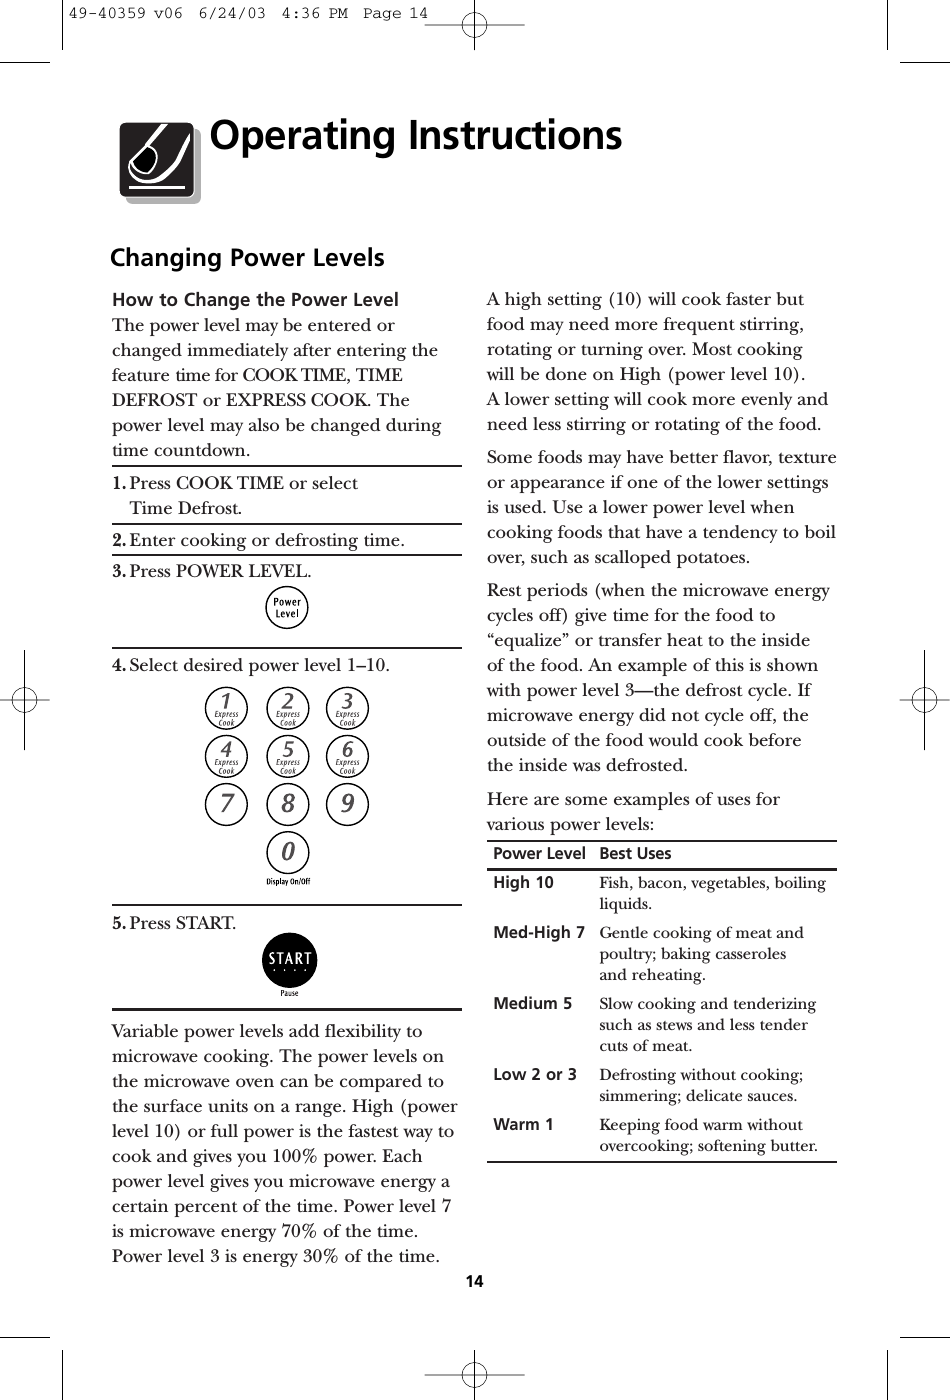 How to Change the Power Level The power level may be entered orchanged immediately after entering thefeature time for COOK TIME, TIMEDEFROST or EXPRESS COOK. Thepower level may also be changed duringtime countdown.1. Press COOK TIME or select Time Defrost.2. Enter cooking or defrosting time.3. Press POWER LEVEL.4. Select desired power level 1–10.5. Press START.Variable power levels add flexibility tomicrowave cooking. The power levels onthe microwave oven can be compared tothe surface units on a range. High (powerlevel 10) or full power is the fastest way tocook and gives you 100% power. Eachpower level gives you microwave energy acertain percent of the time. Power level 7is microwave energy 70% of the time.Power level 3 is energy 30% of the time.A high setting (10) will cook faster butfood may need more frequent stirring,rotating or turning over. Most cooking will be done on High (power level 10). A lower setting will cook more evenly andneed less stirring or rotating of the food. Some foods may have better flavor, textureor appearance if one of the lower settingsis used. Use a lower power level whencooking foods that have a tendency to boilover, such as scalloped potatoes.Rest periods (when the microwave energycycles off) give time for the food to“equalize” or transfer heat to the inside of the food. An example of this is shownwith power level 3—the defrost cycle. Ifmicrowave energy did not cycle off, theoutside of the food would cook before the inside was defrosted.Here are some examples of uses forvarious power levels:Power Level Best UsesHigh 10 Fish, bacon, vegetables, boiling liquids.Med-High 7 Gentle cooking of meat and poultry; baking casseroles and reheating.Medium 5 Slow cooking and tenderizing such as stews and less tender cuts of meat.Low 2 or 3  Defrosting without cooking; simmering; delicate sauces.Warm 1 Keeping food warm without overcooking; softening butter.Changing Power Levels14Operating Instructions49-40359 v06  6/24/03  4:36 PM  Page 14